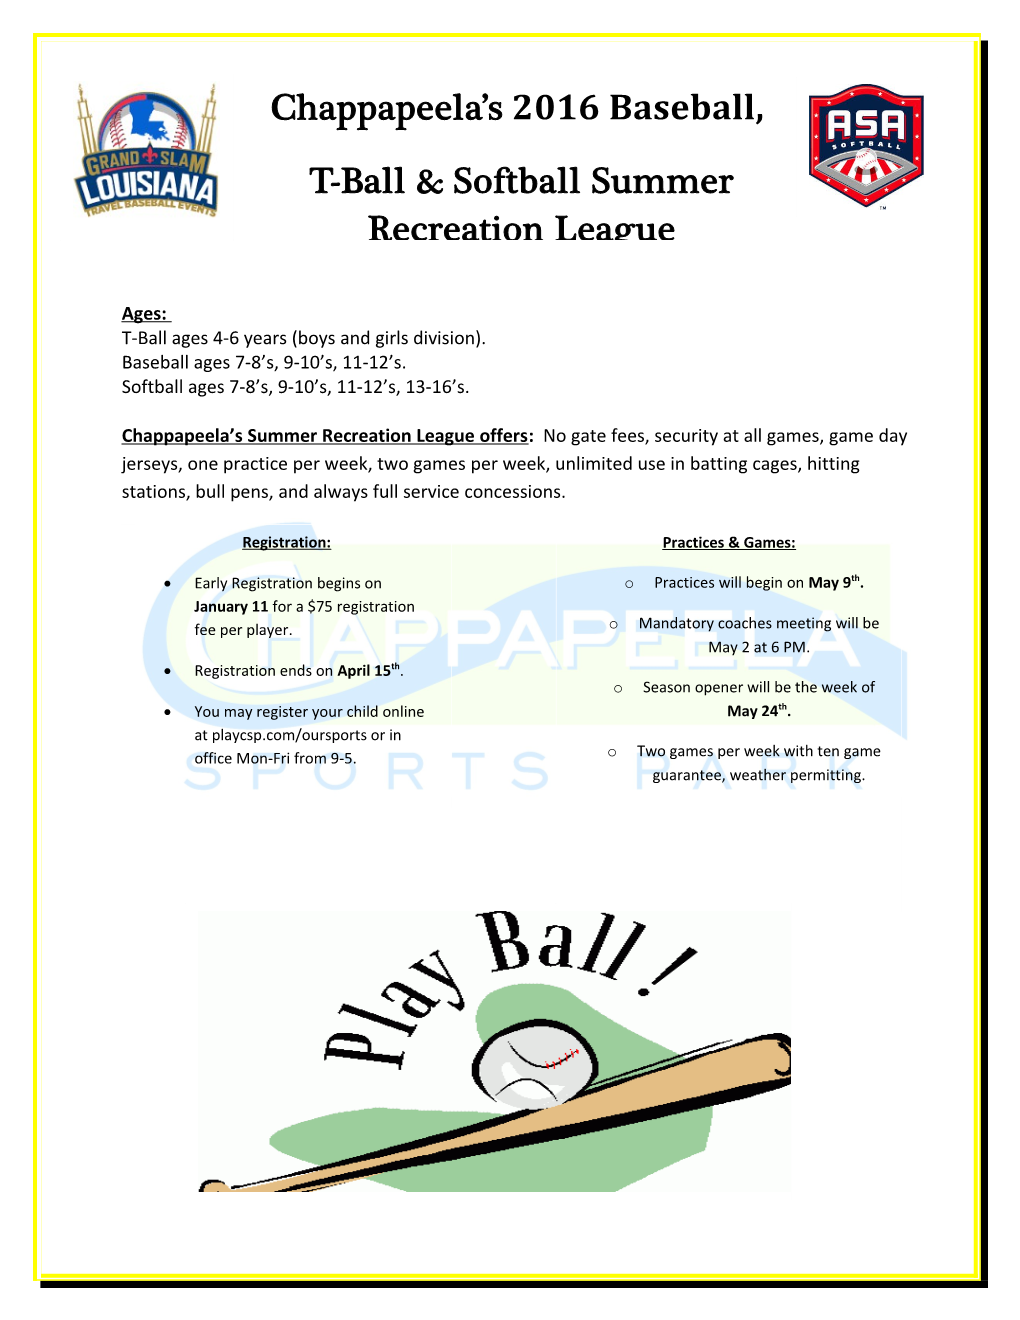 T-Ball Ages 4-6 Years (Boys and Girls Division)